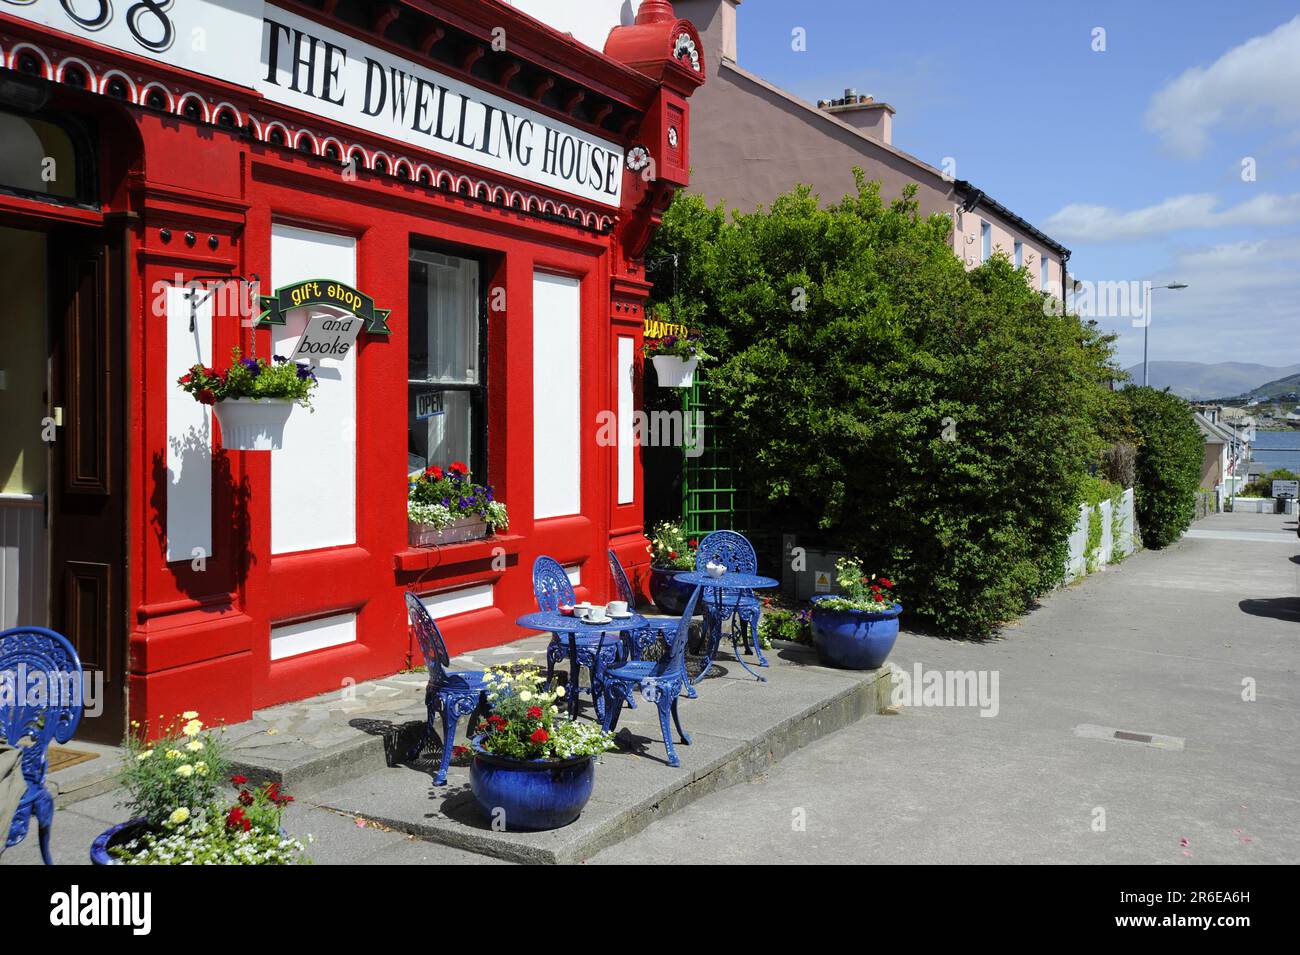 Cafe 'Das Haus', Ritter Stadt, Valentia, Iveragh-Halbinsel, Ring of Kerry, County Kerry, Irland Stockfoto